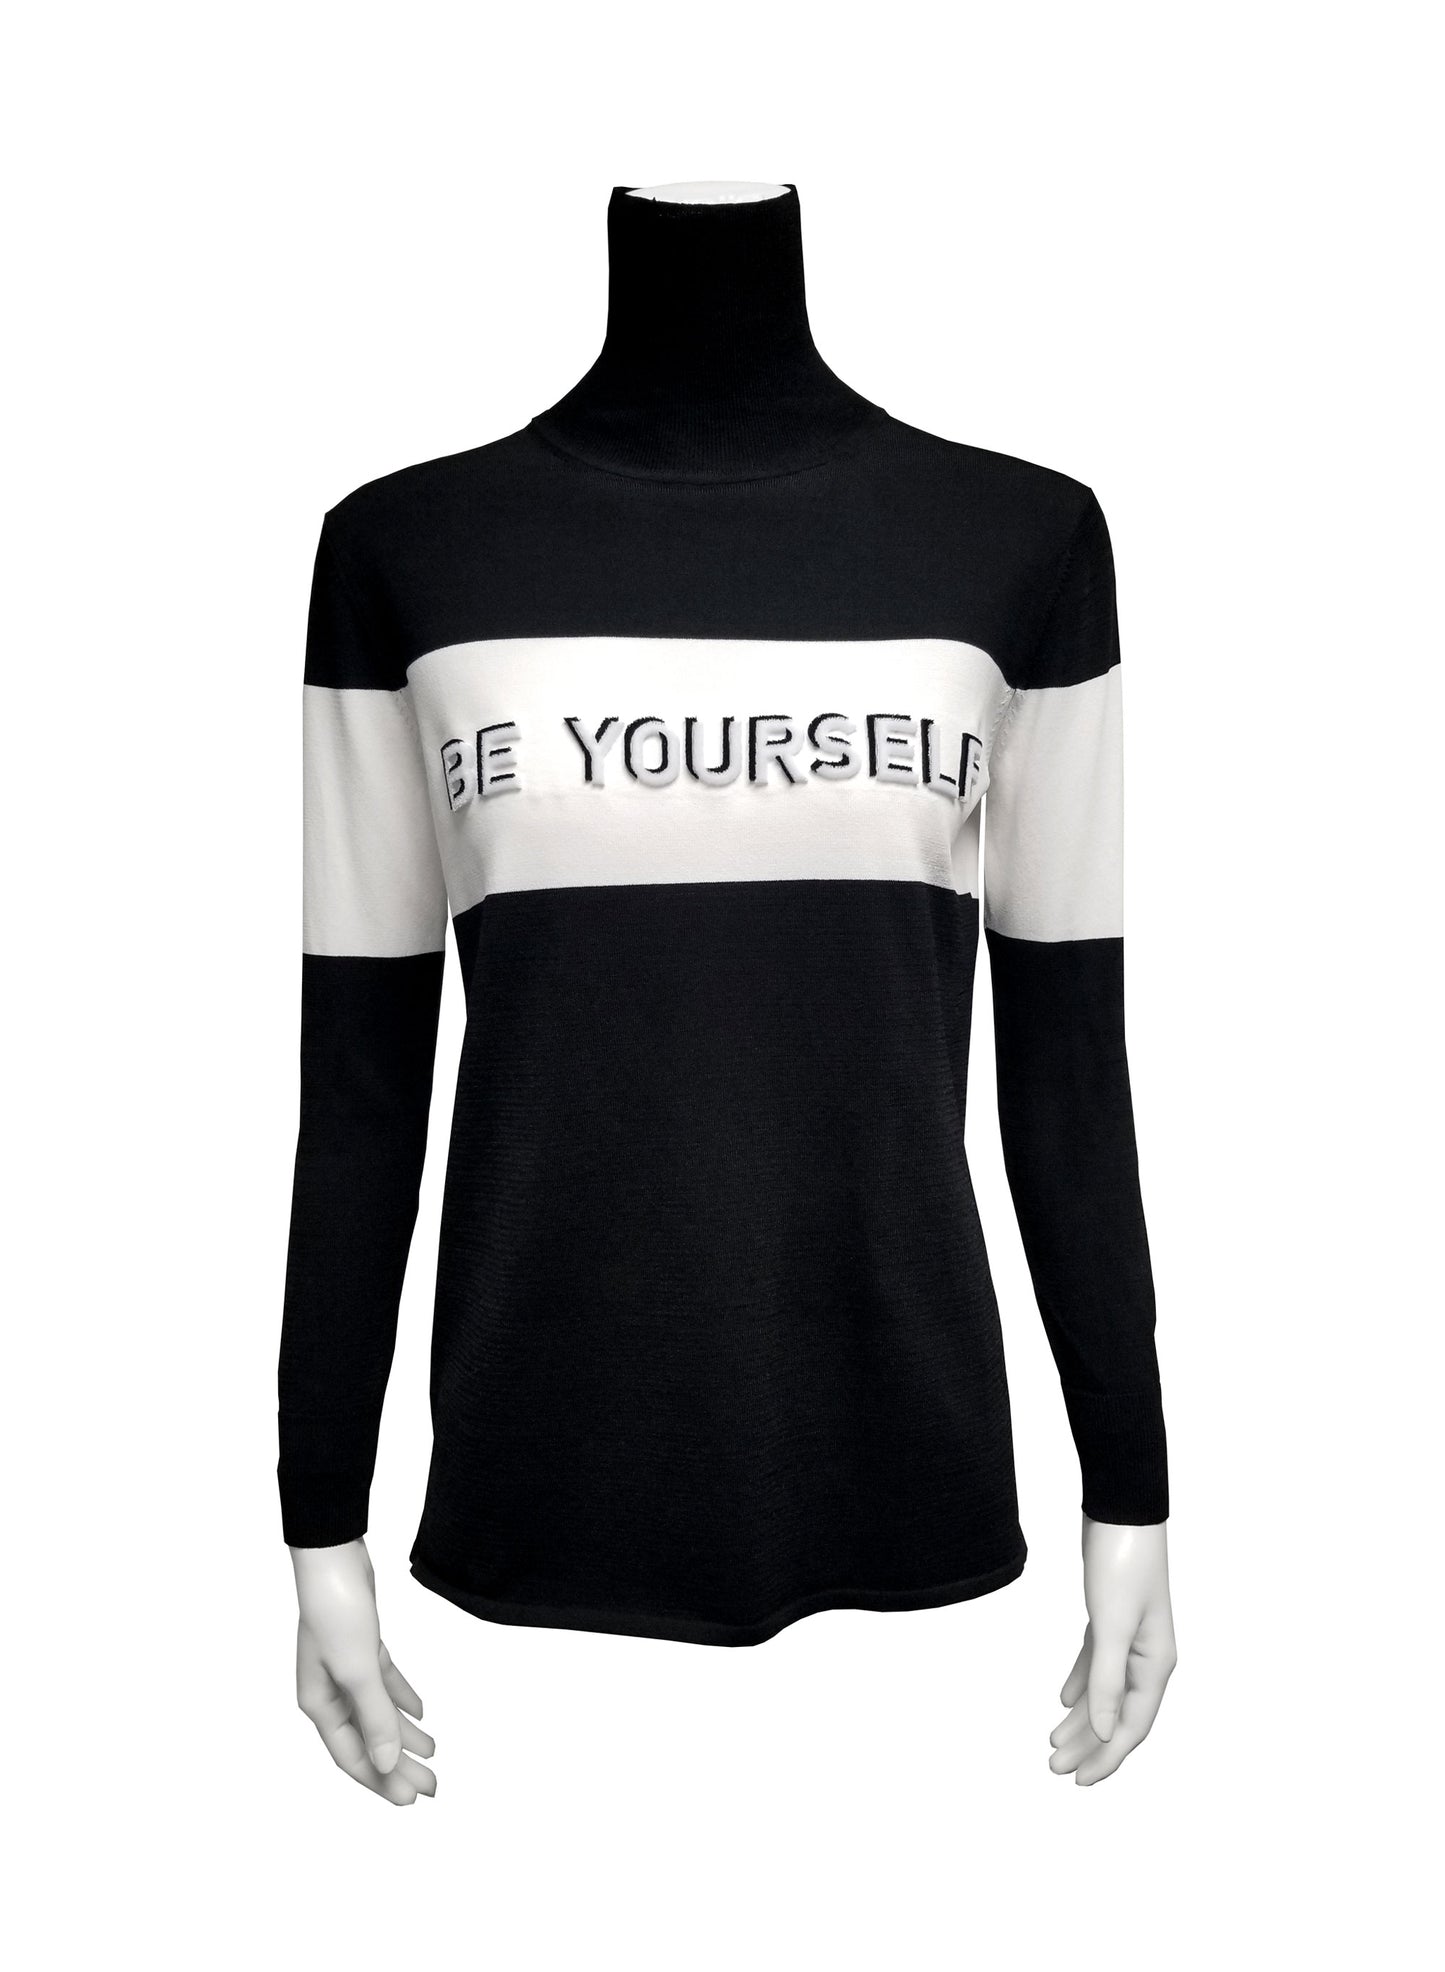 Black “BE YOURSELF” Sweater